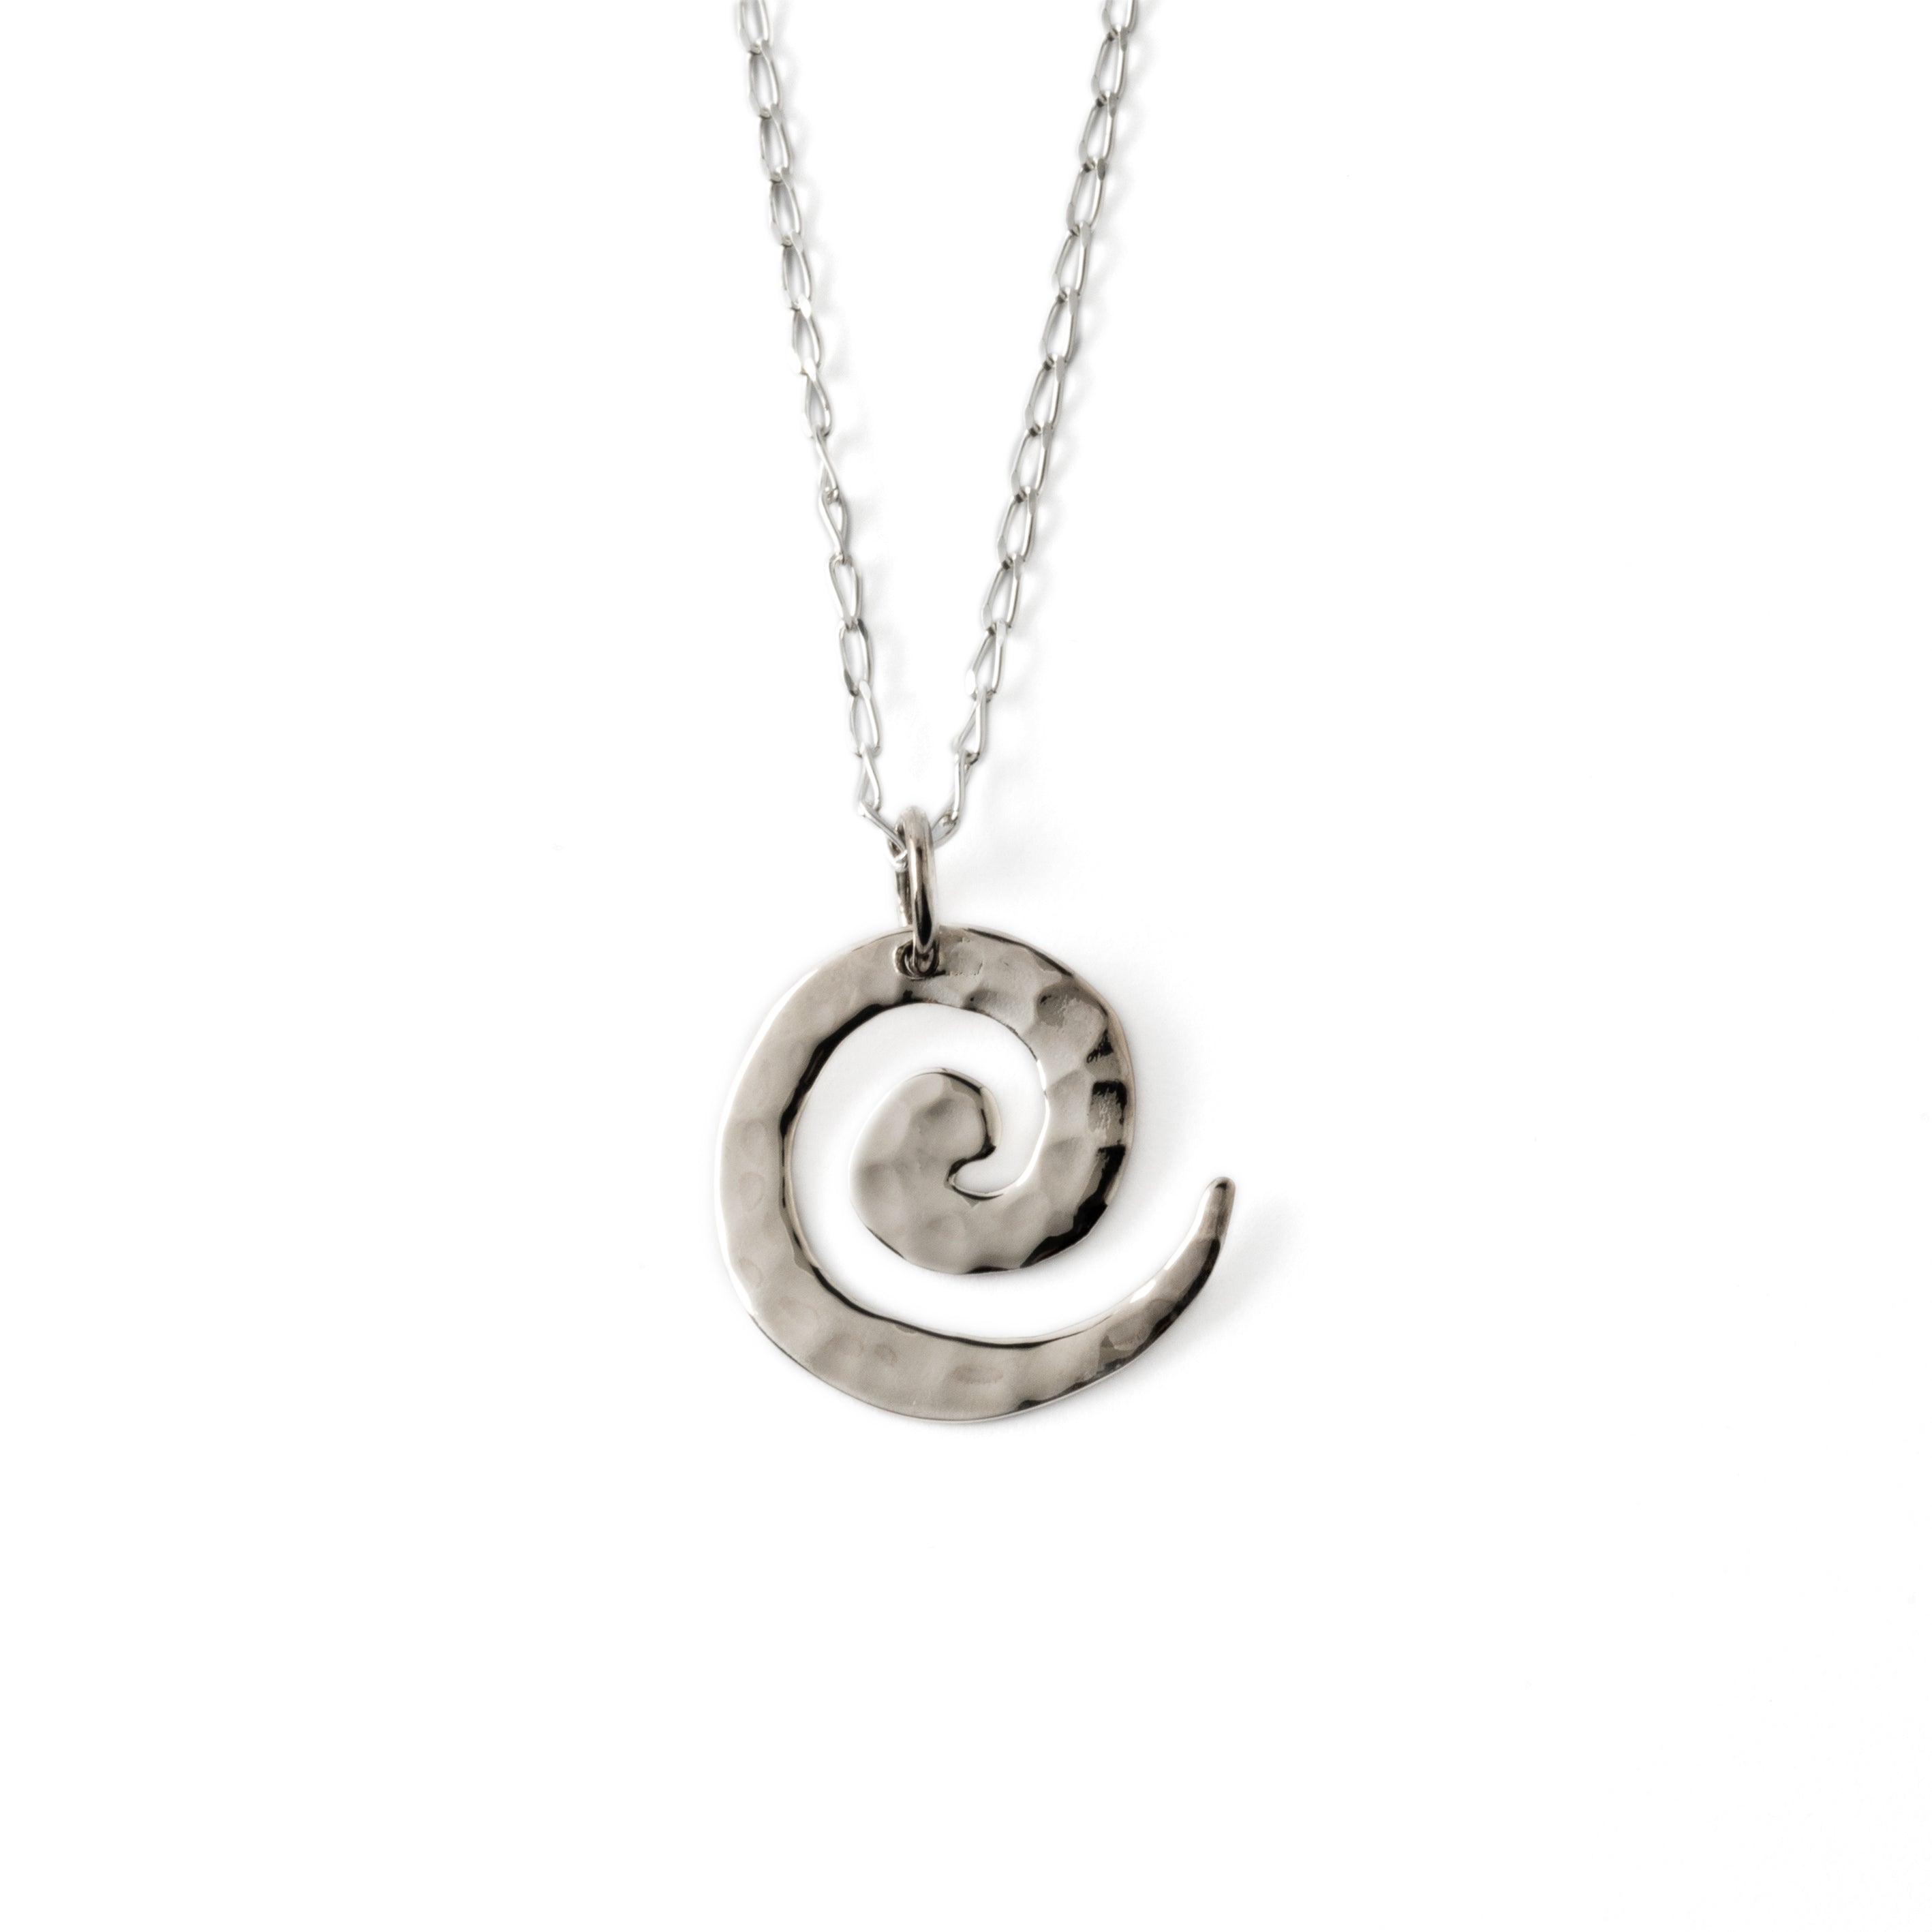 Hammered silver spiral charm necklace frontal view